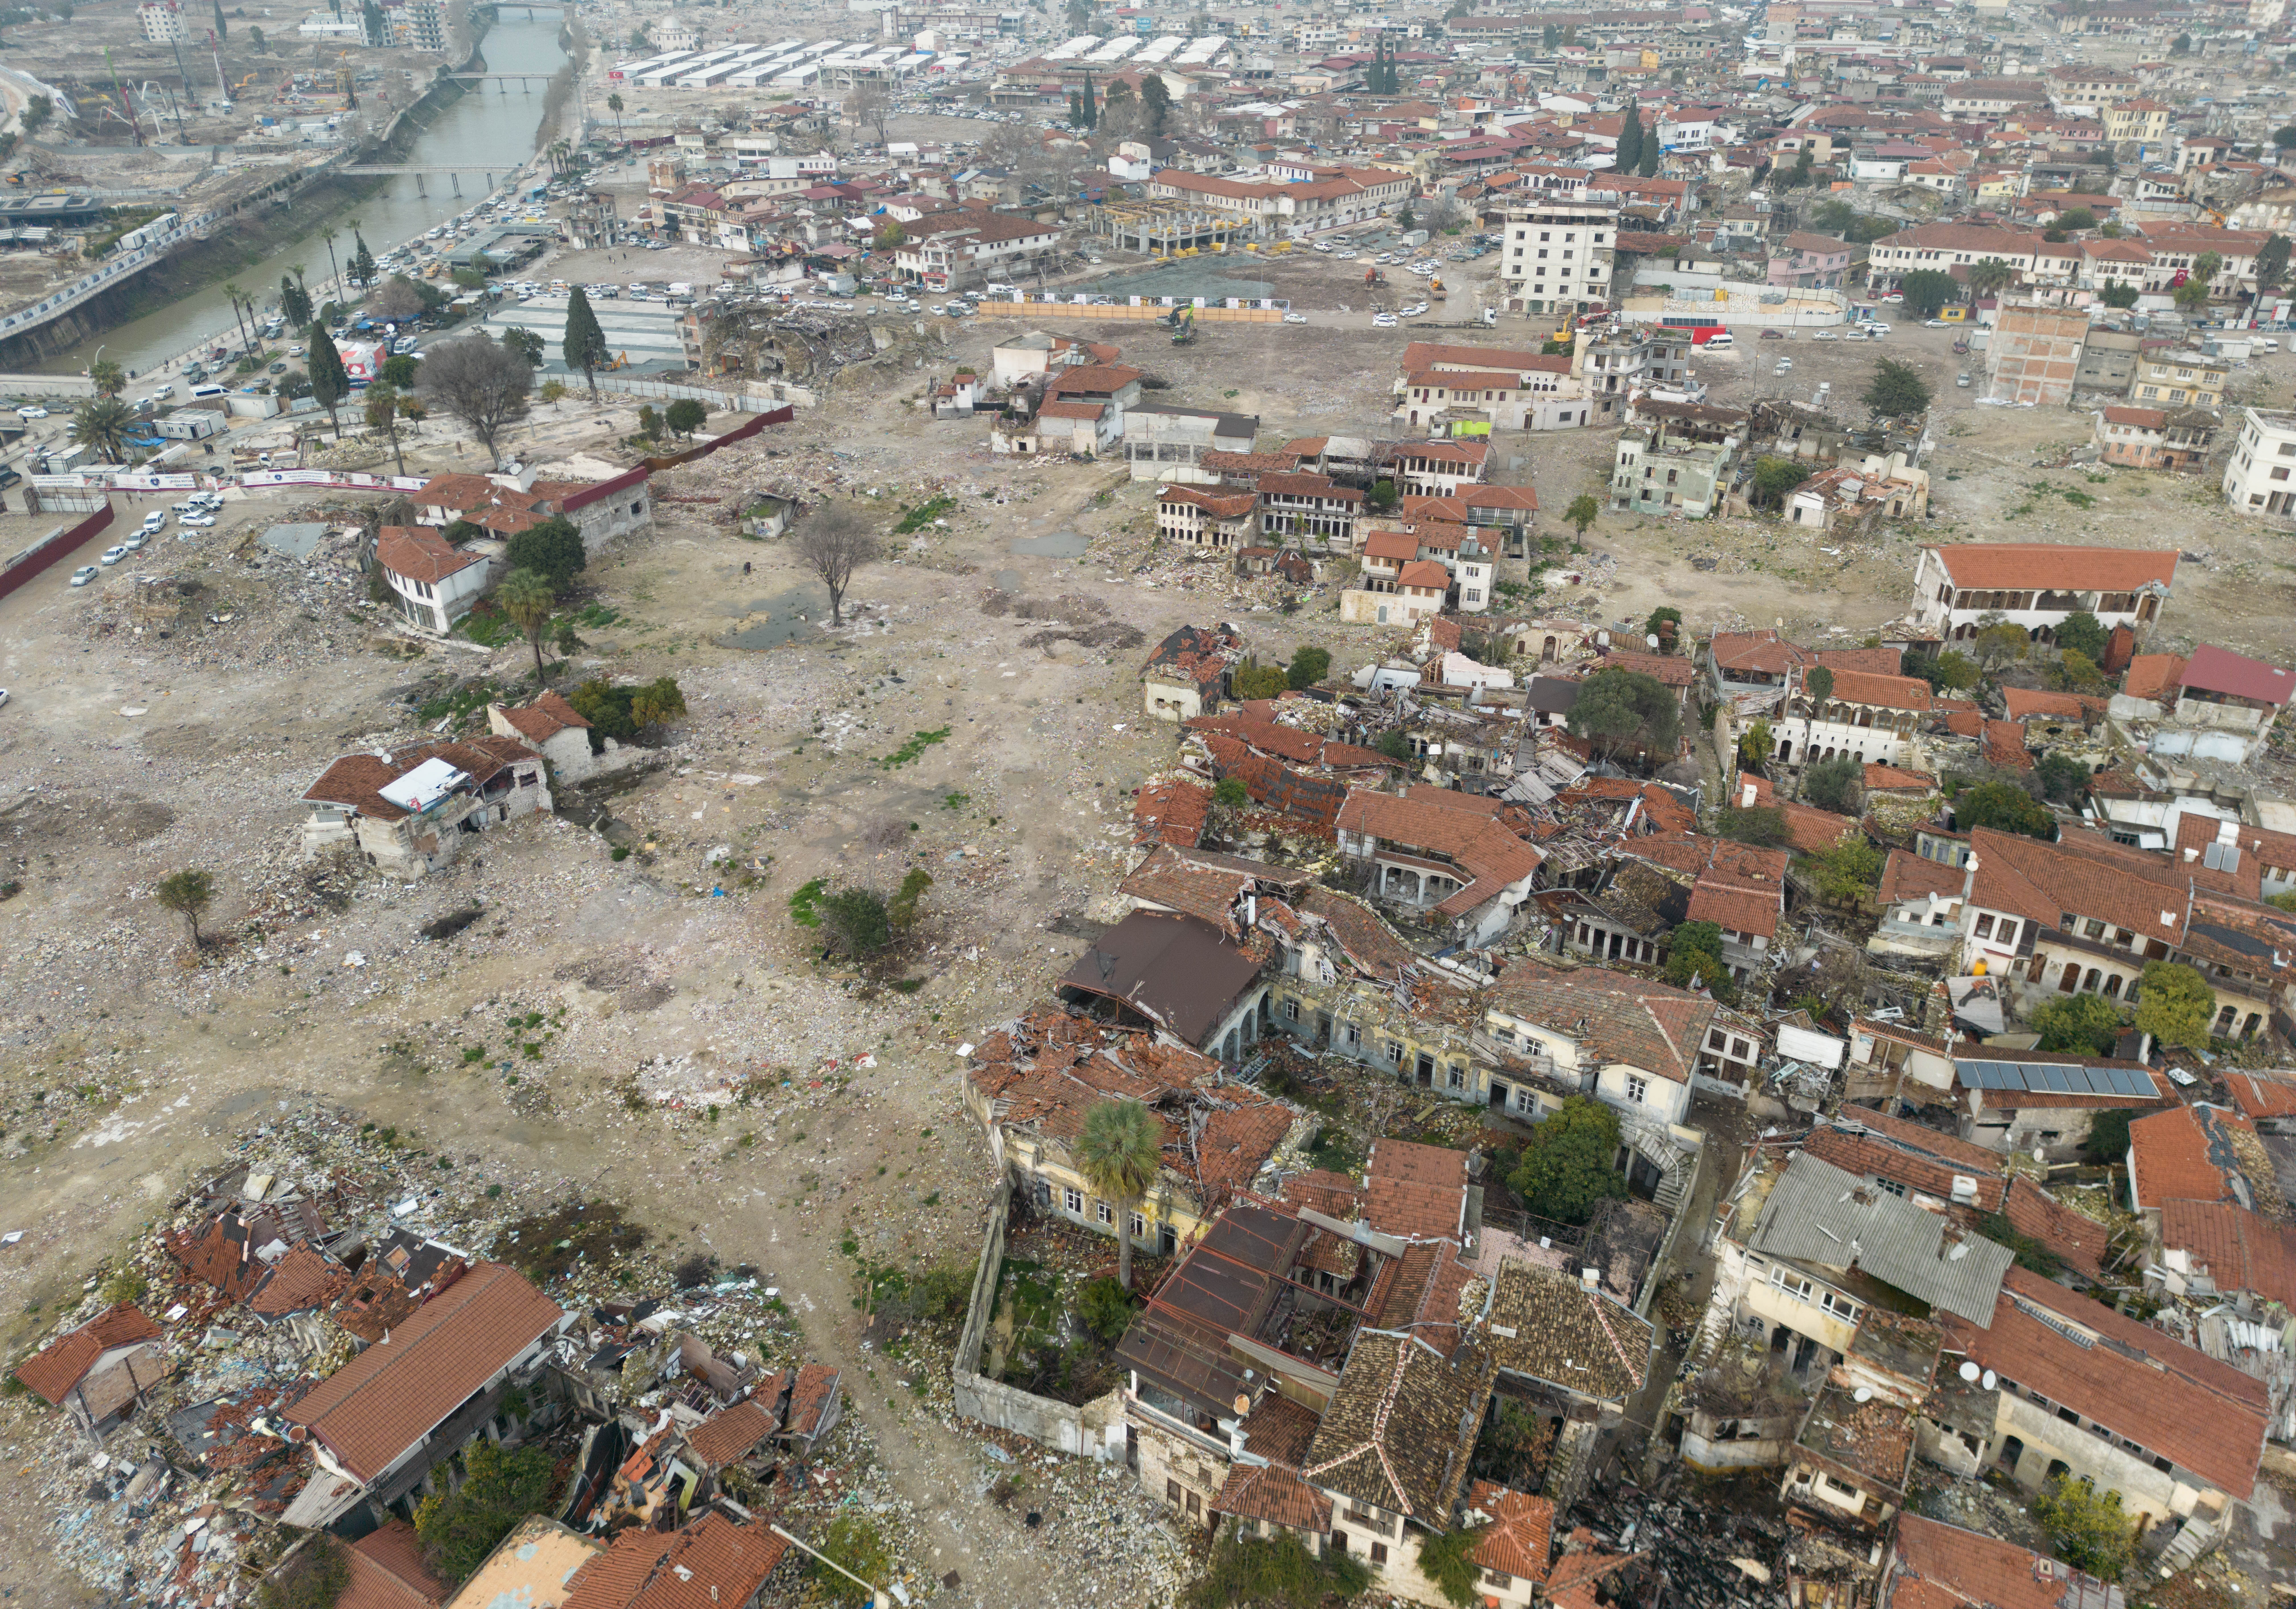 View of ruined houses in the old town centre of Antakya. Numerous houses in the centre of the city were destroyed or severely damaged in the earthquake a year ago.